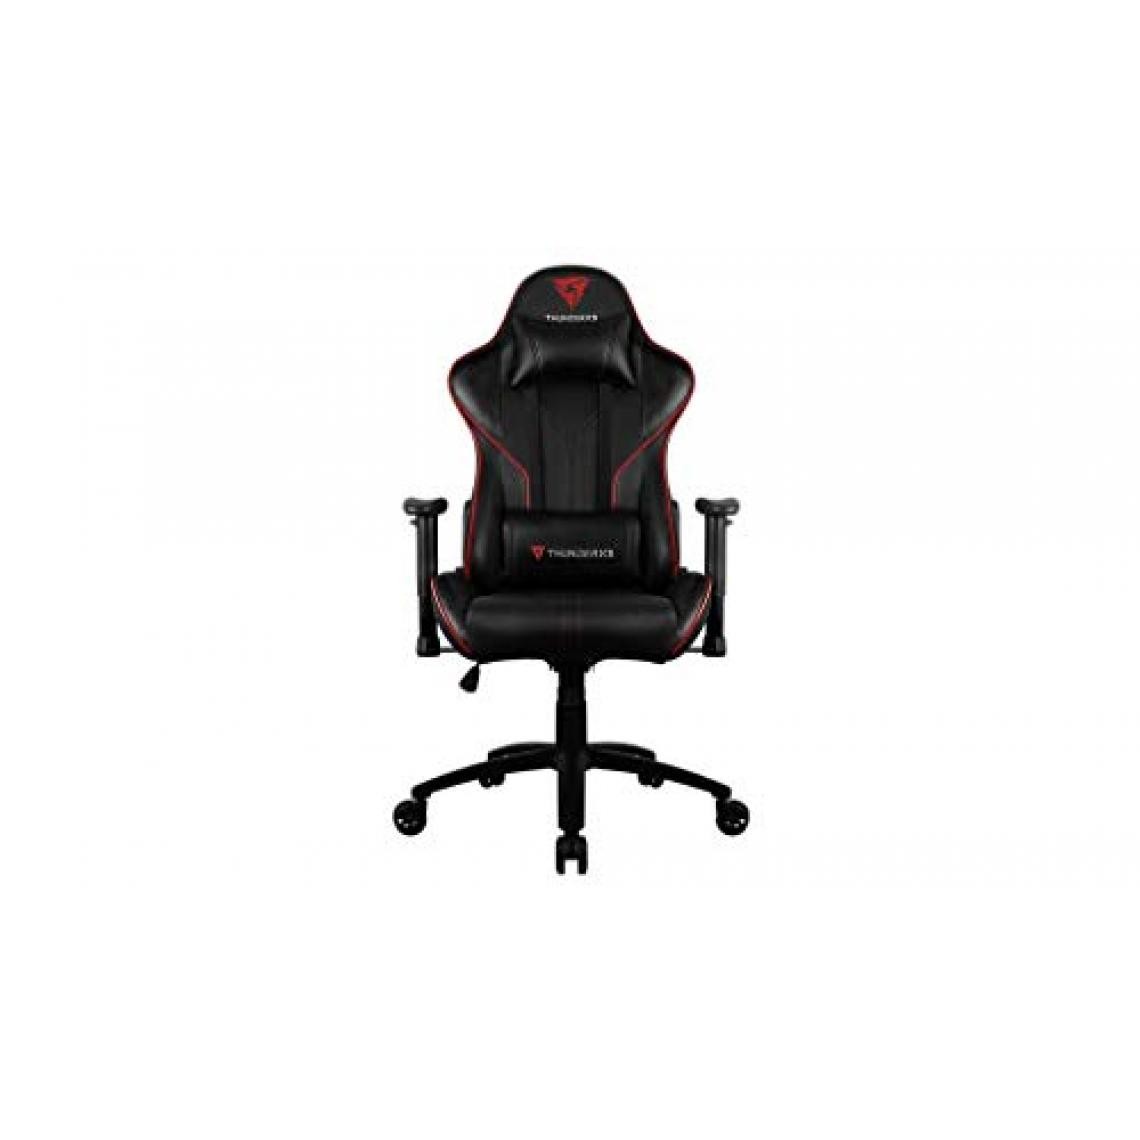 ThunderX3 - Fauteuil Gamer RC3 Hex RGB (Noir/Rouge) - Chaise gamer